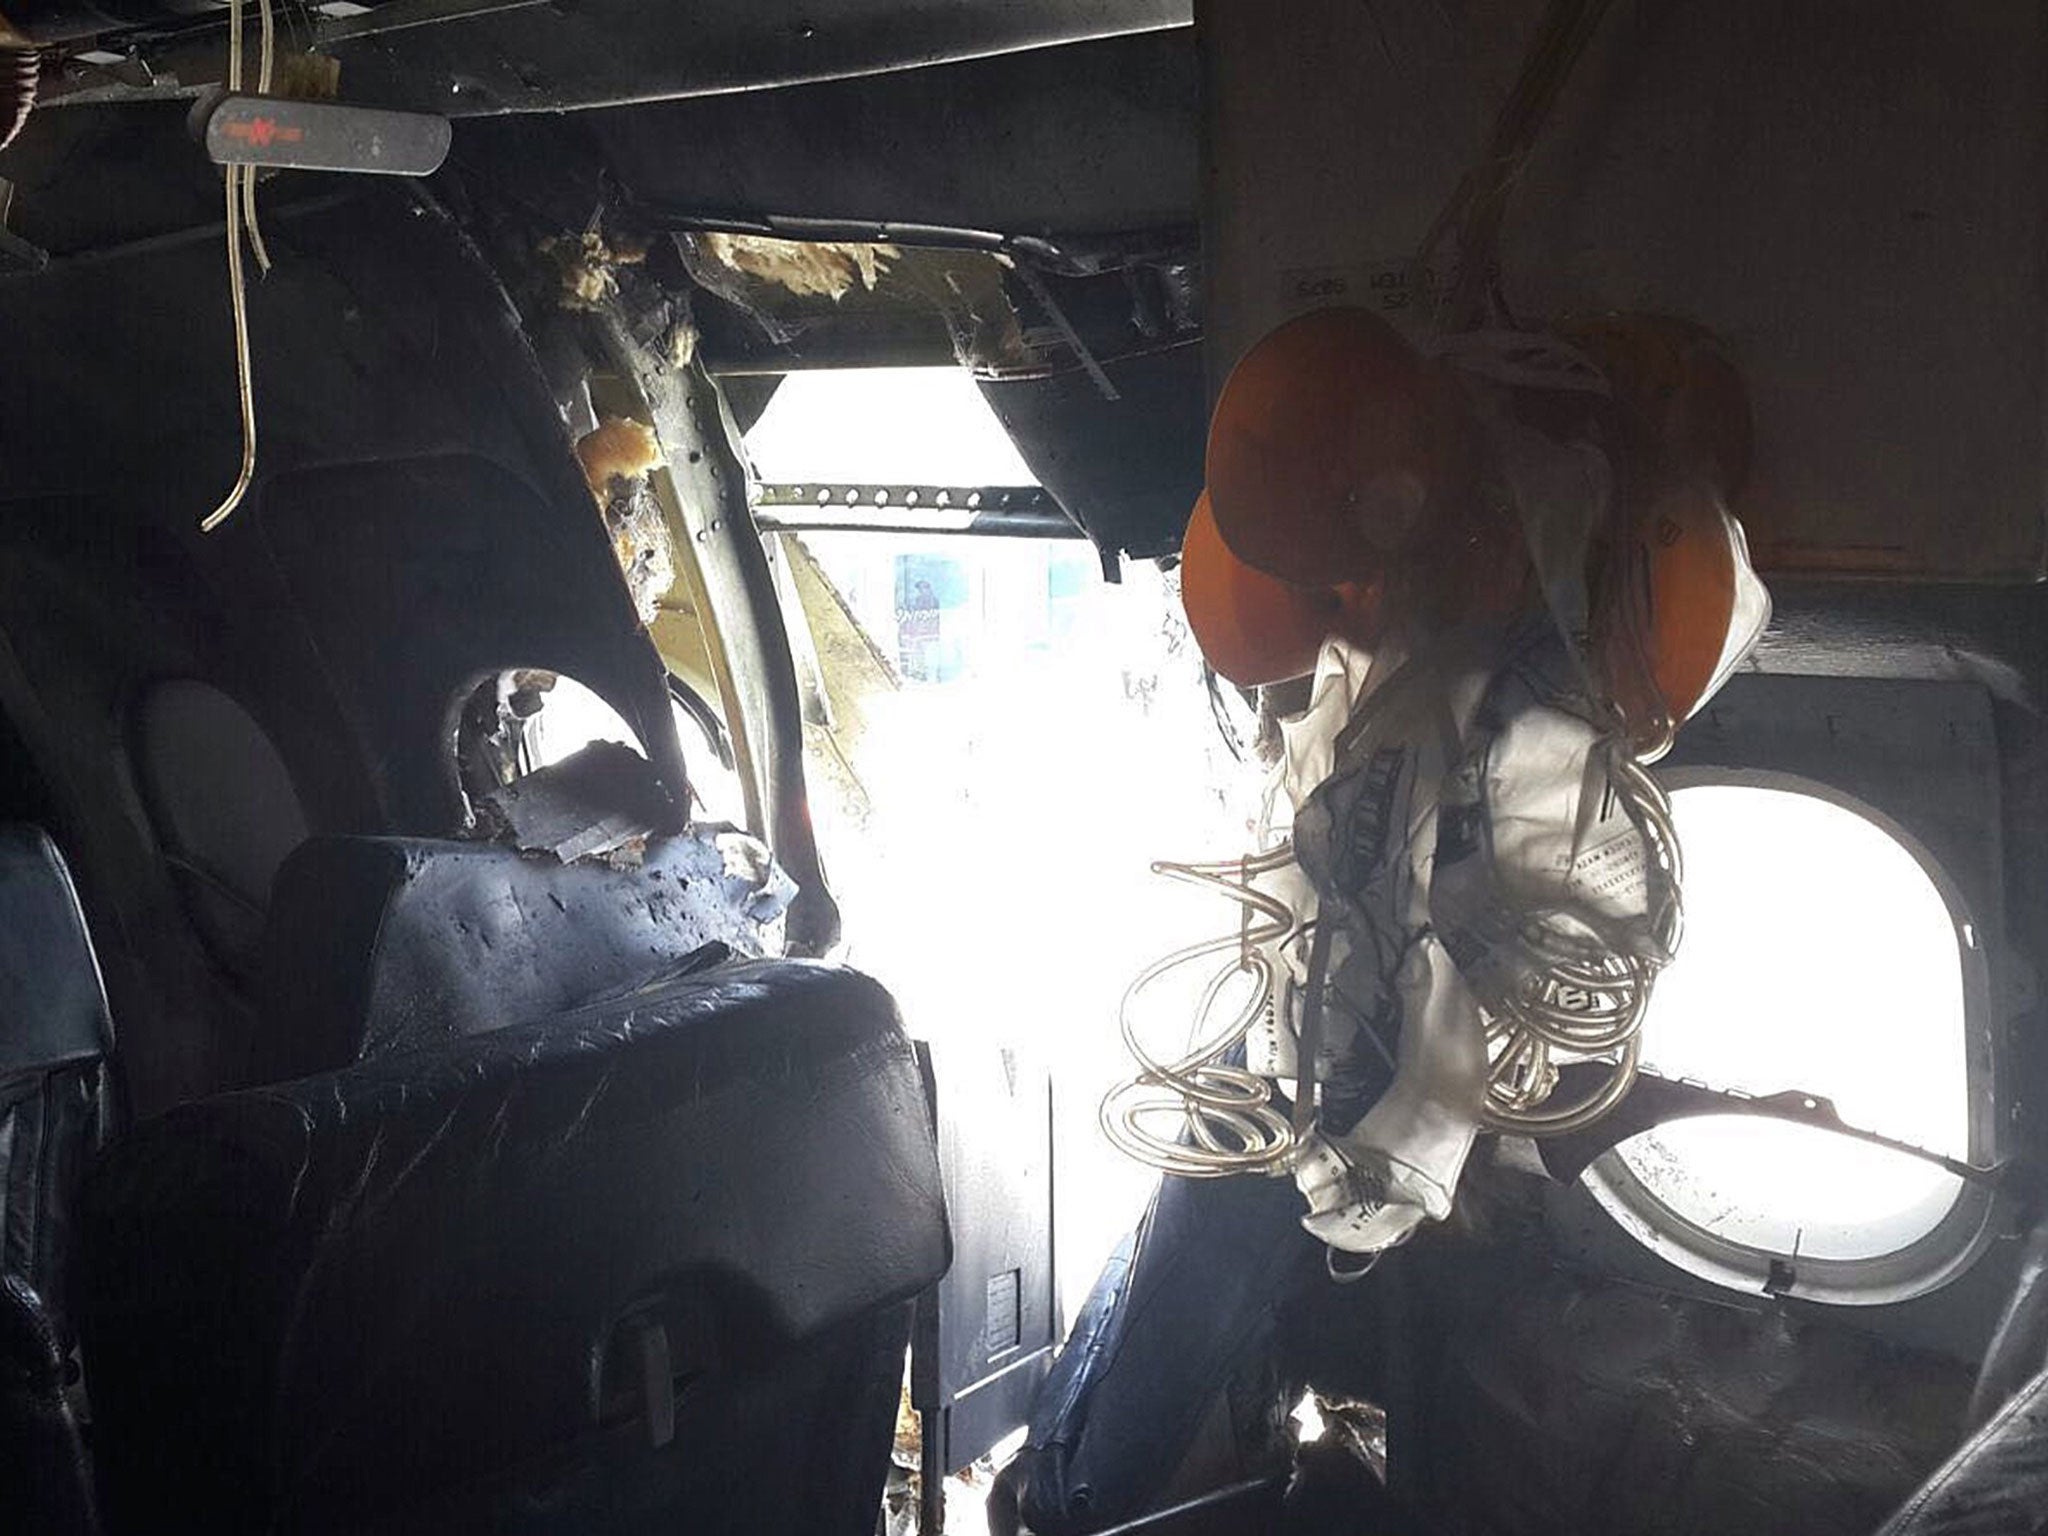 The hole seen from inside the aircraft